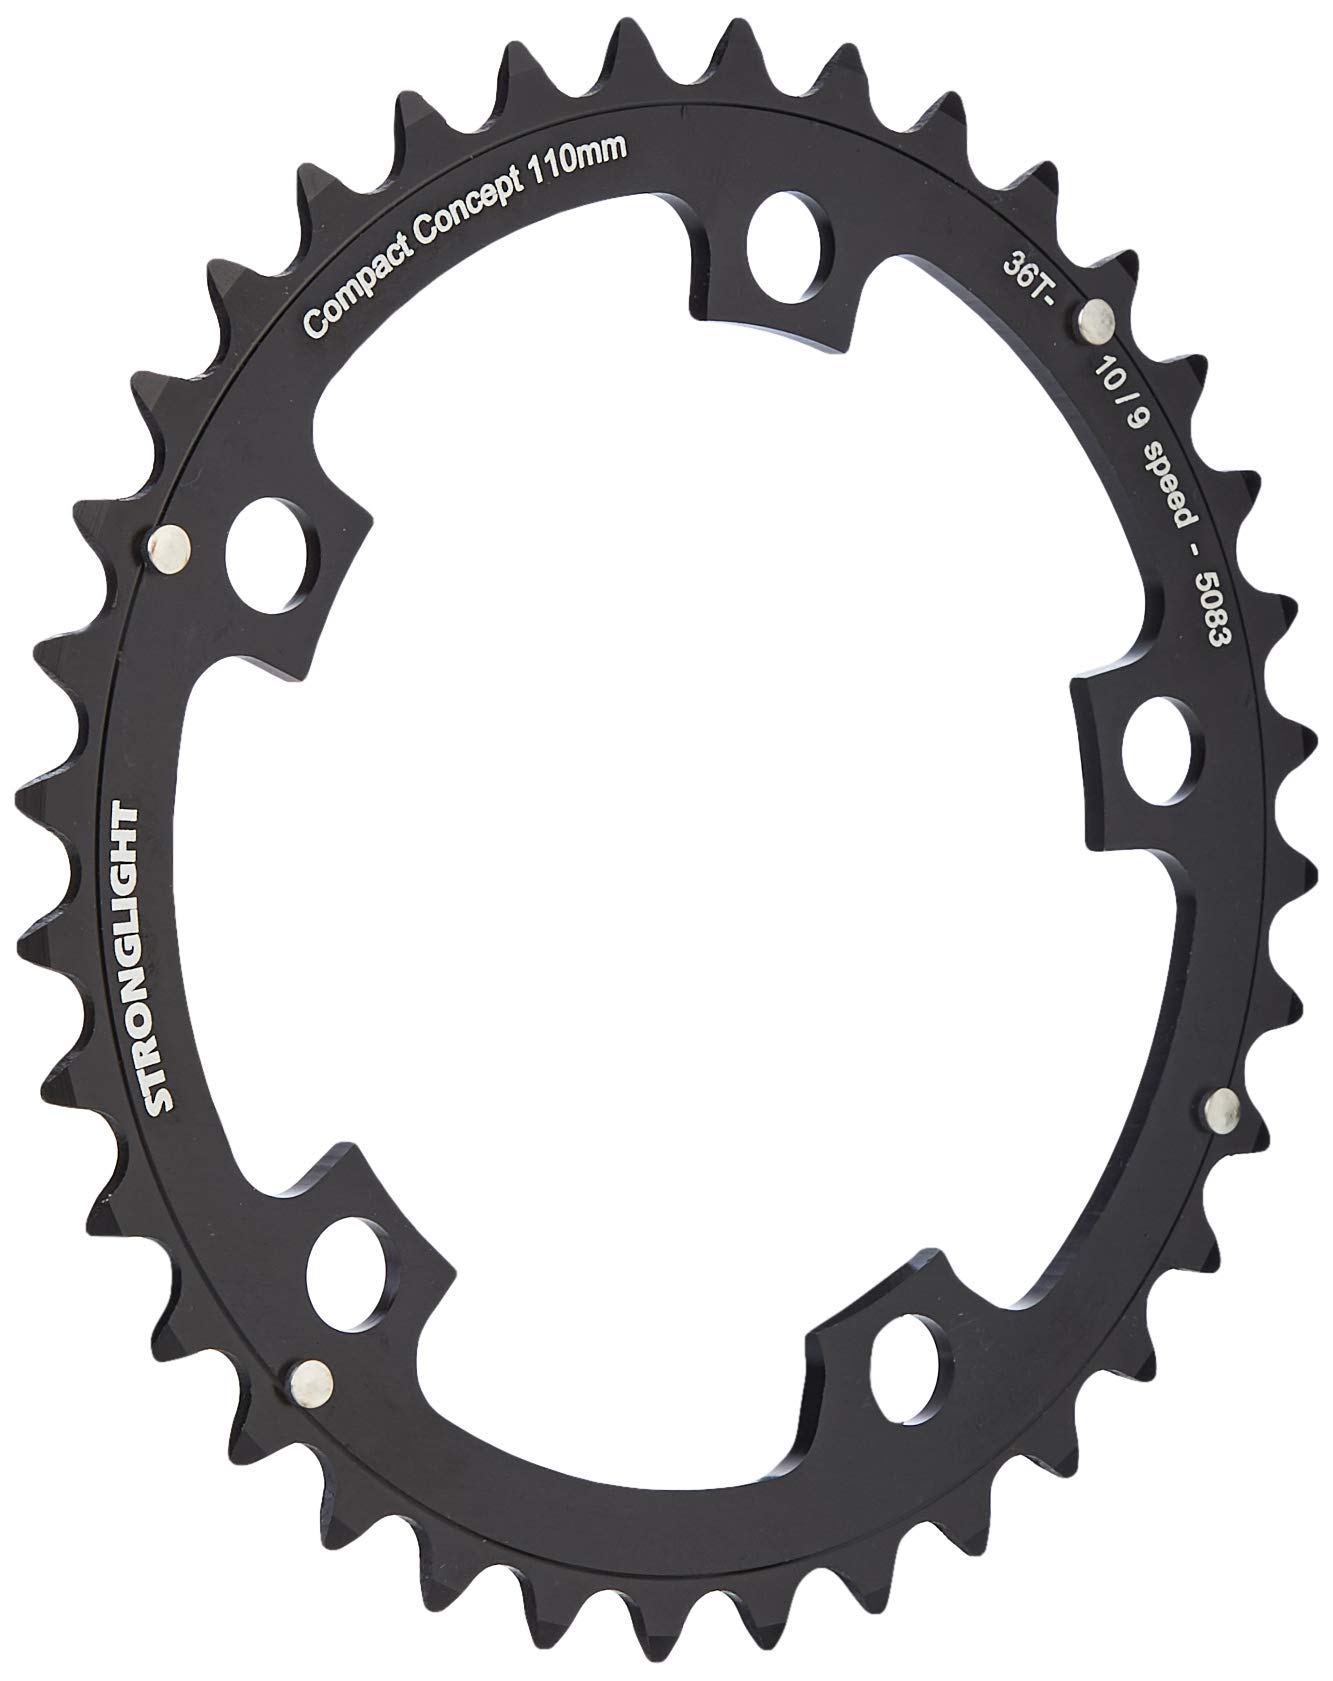 34T 5-Arm 110mm Chainring Black Stronglight